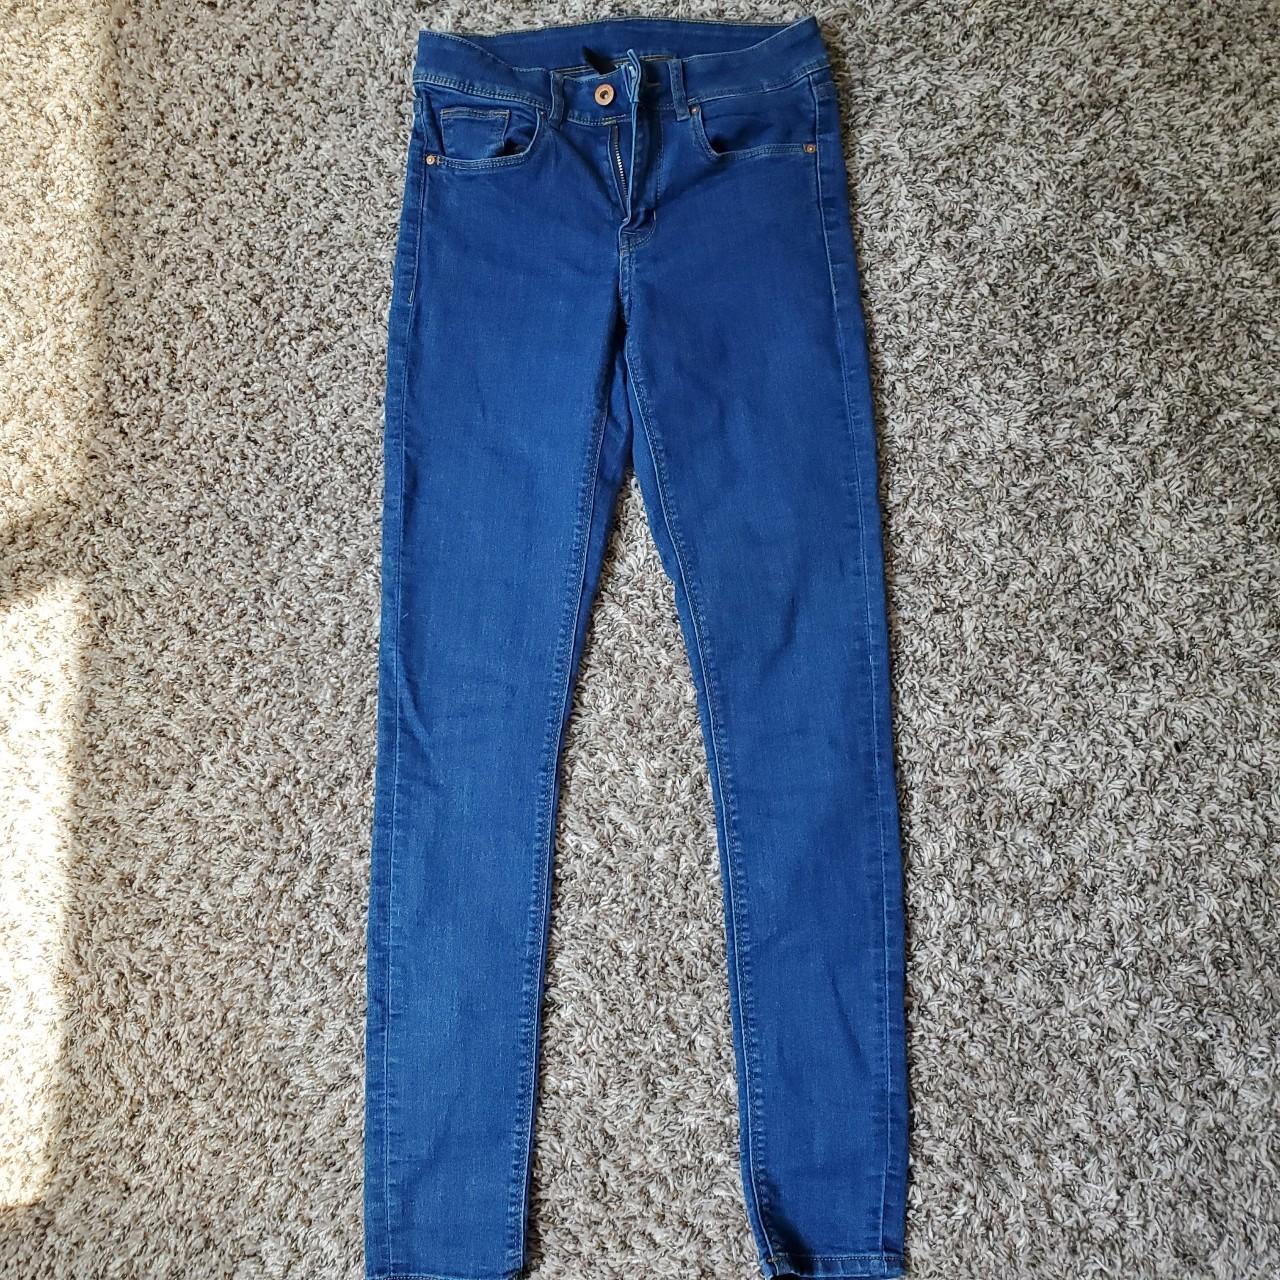 H&M DIVIDED Skinny Jeans Size: Fits XS/0 (Tag... - Depop